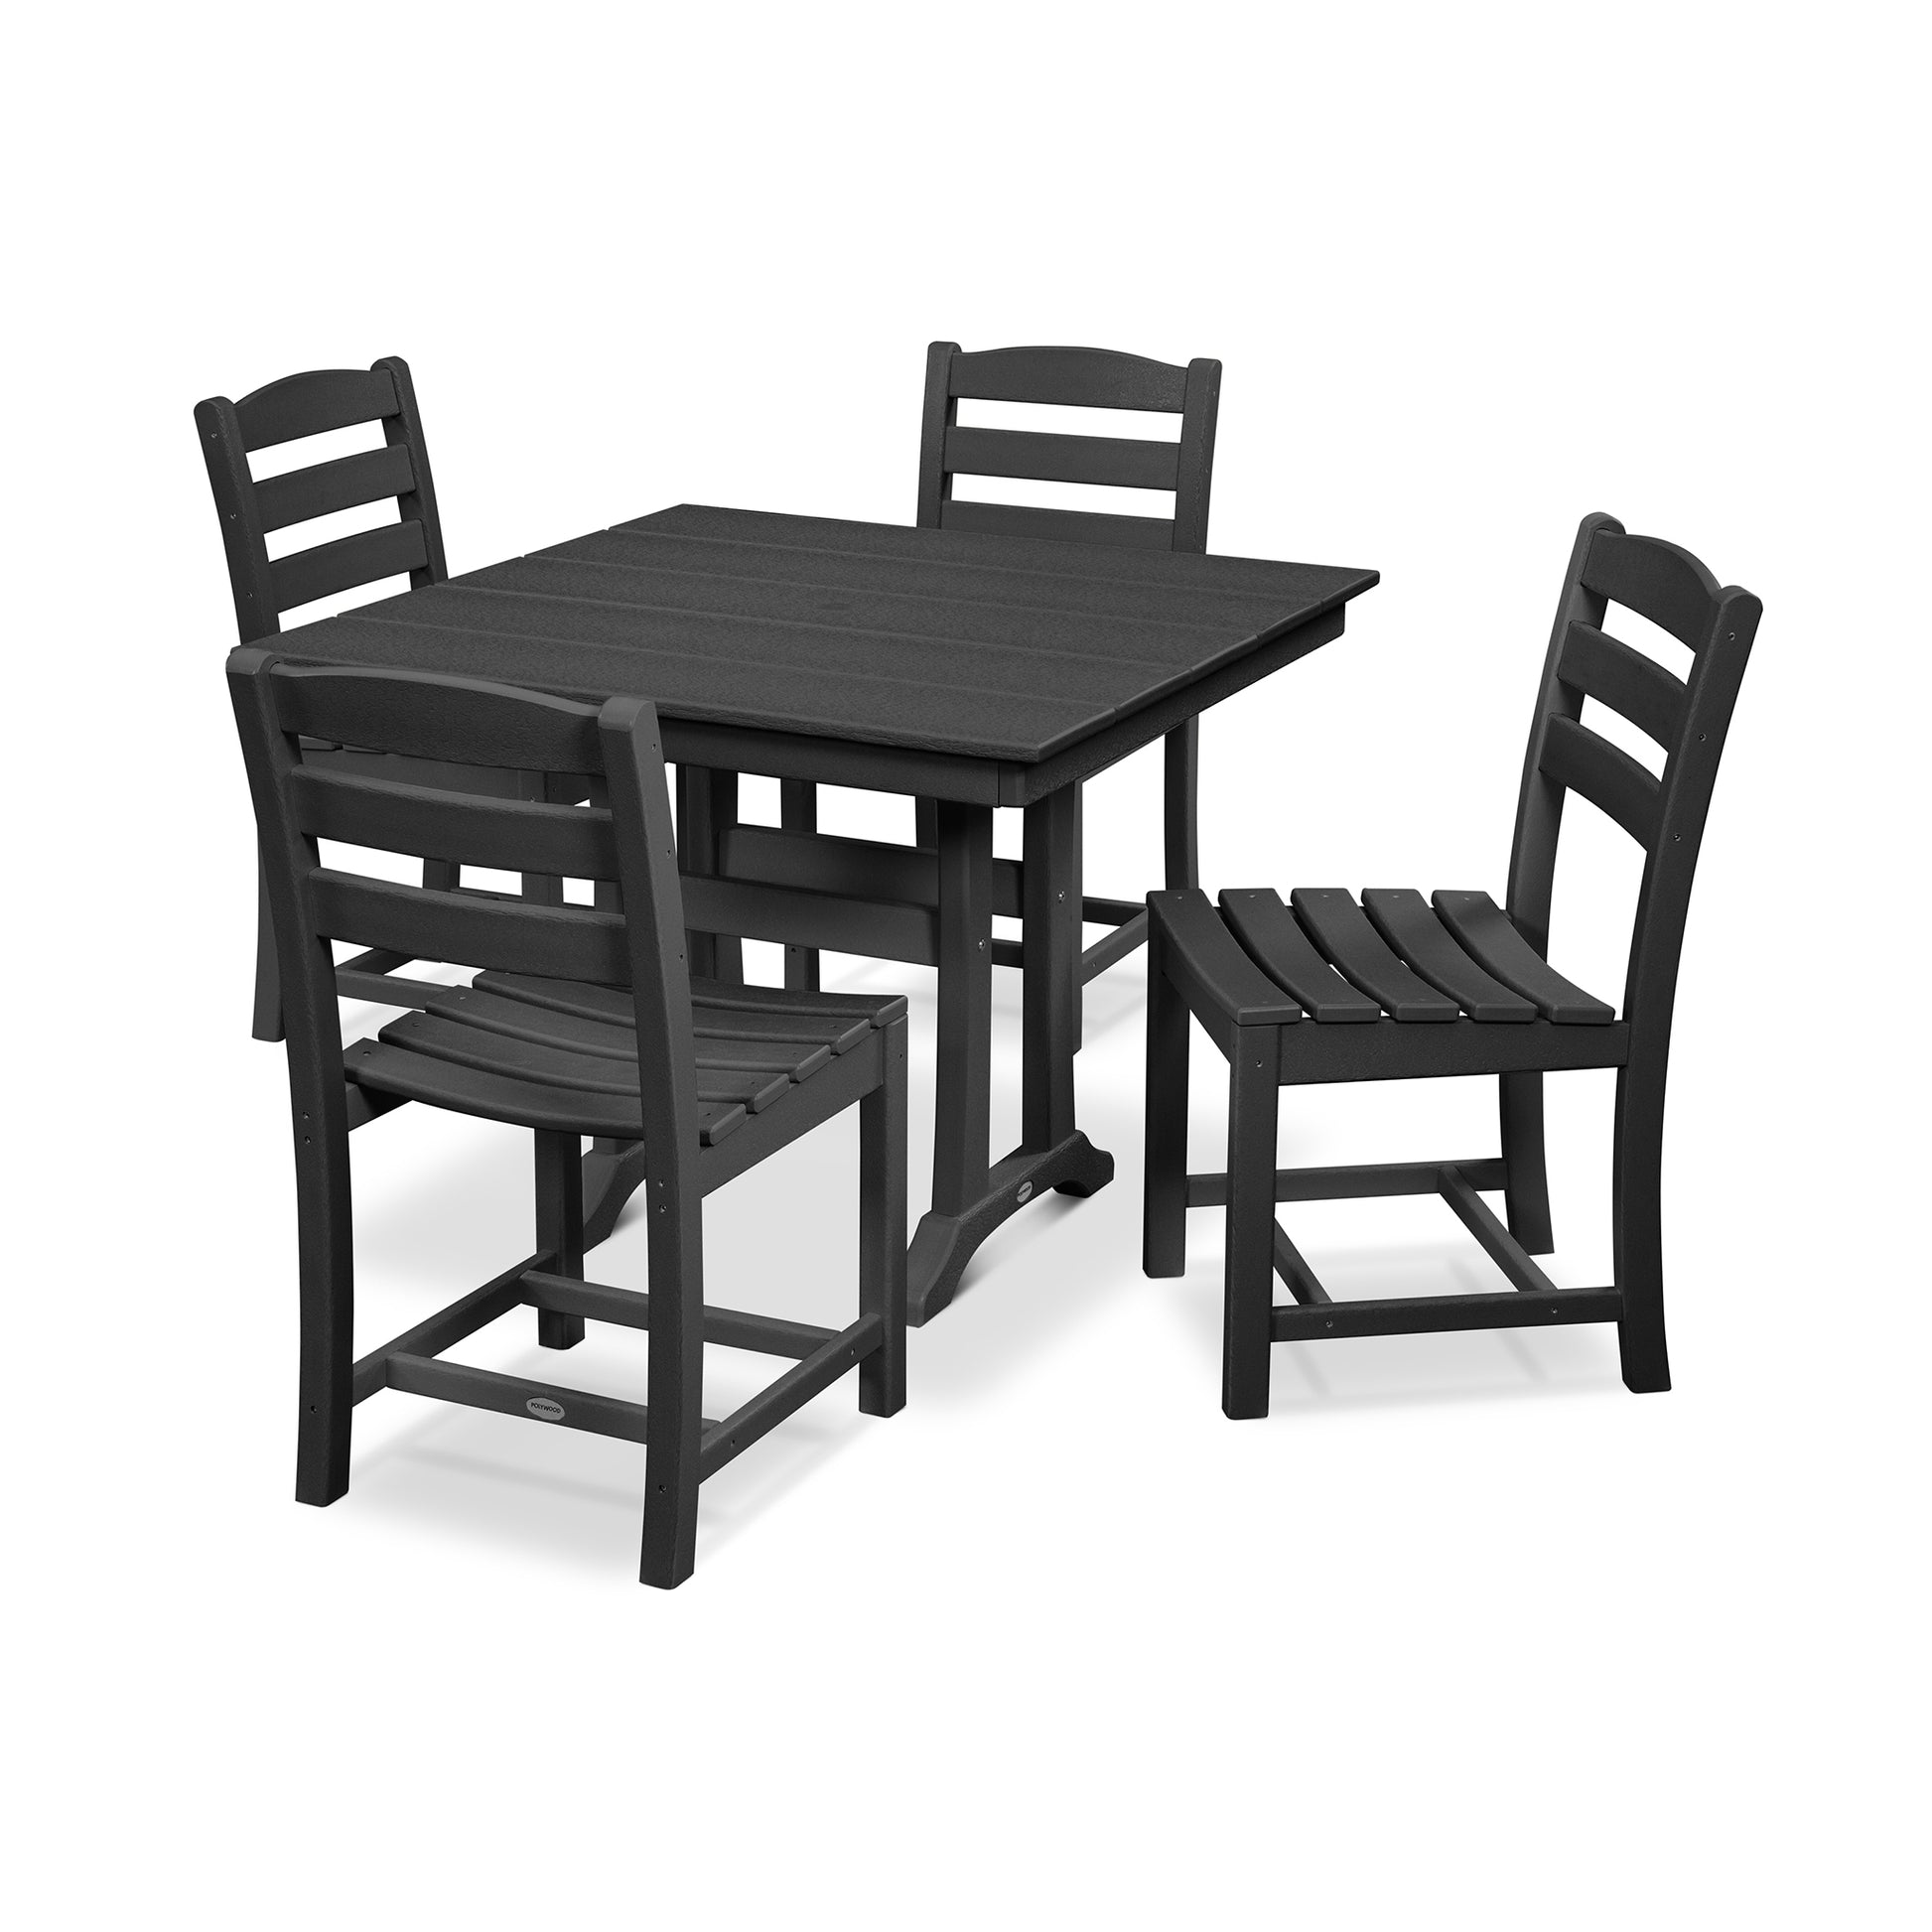 A modern outdoor dining set featuring a square black POLYWOOD La Casa Café 5-Piece Farmhouse Trestle Side Chair Dining Set, set against a white background.